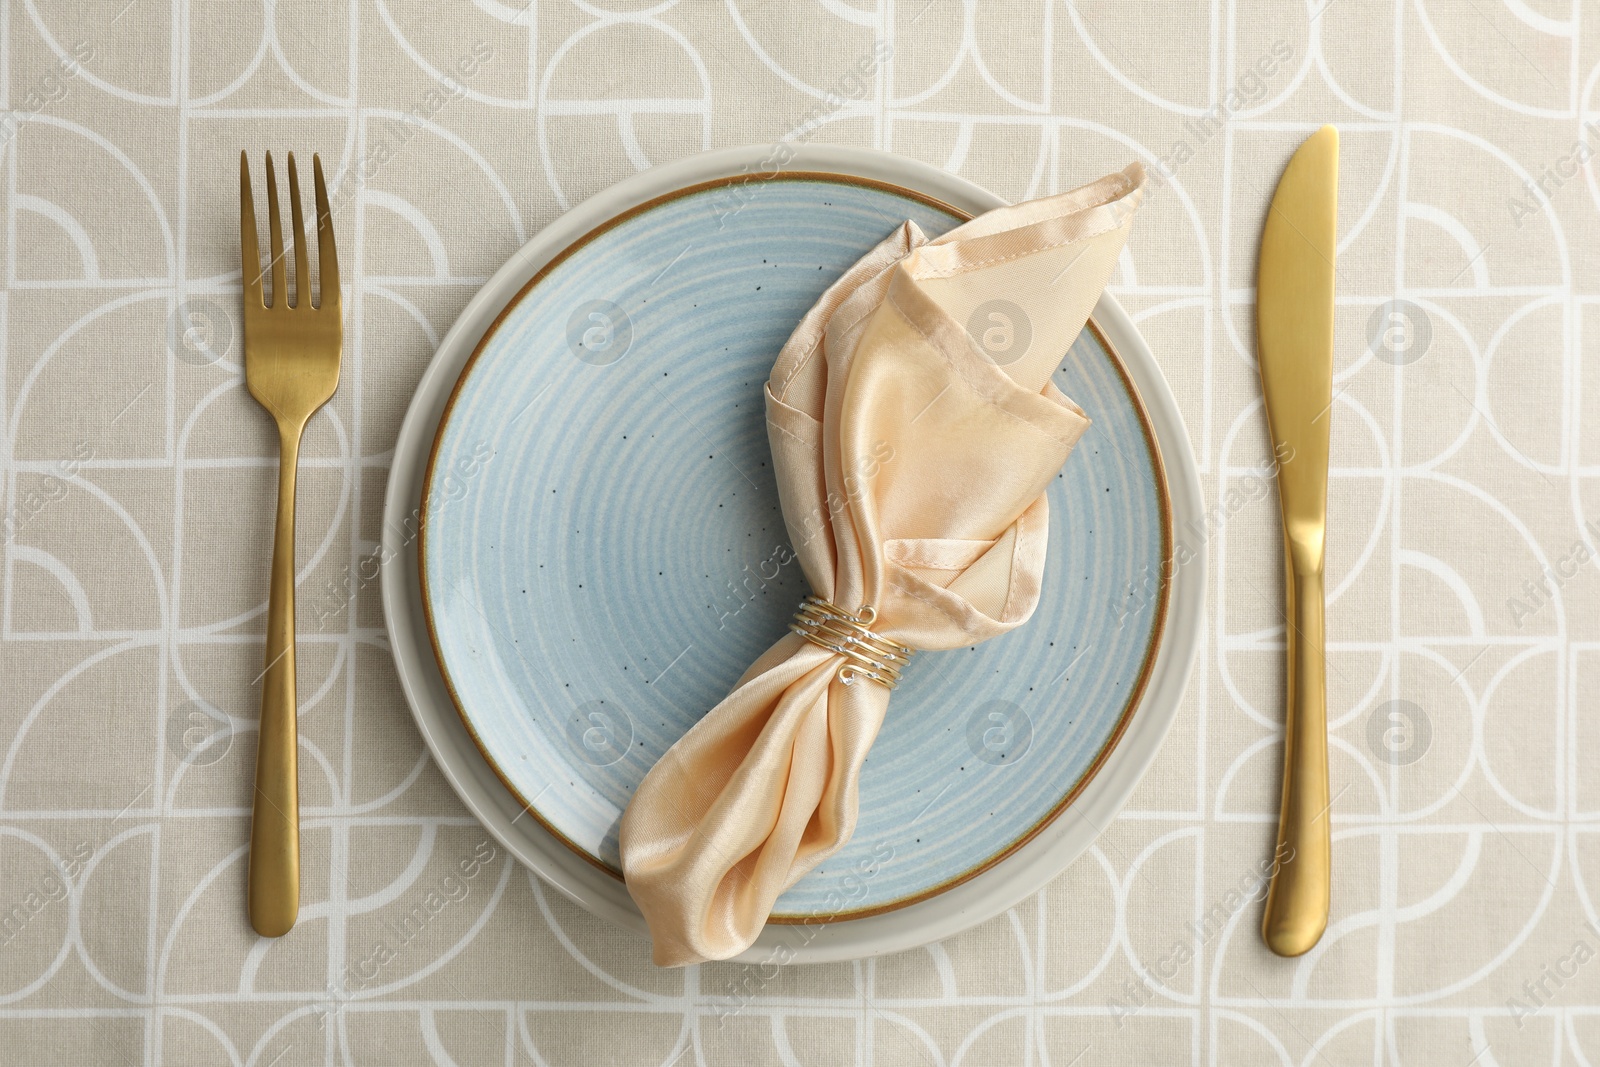 Photo of Stylish setting with cutlery, plates and napkin on table, top view